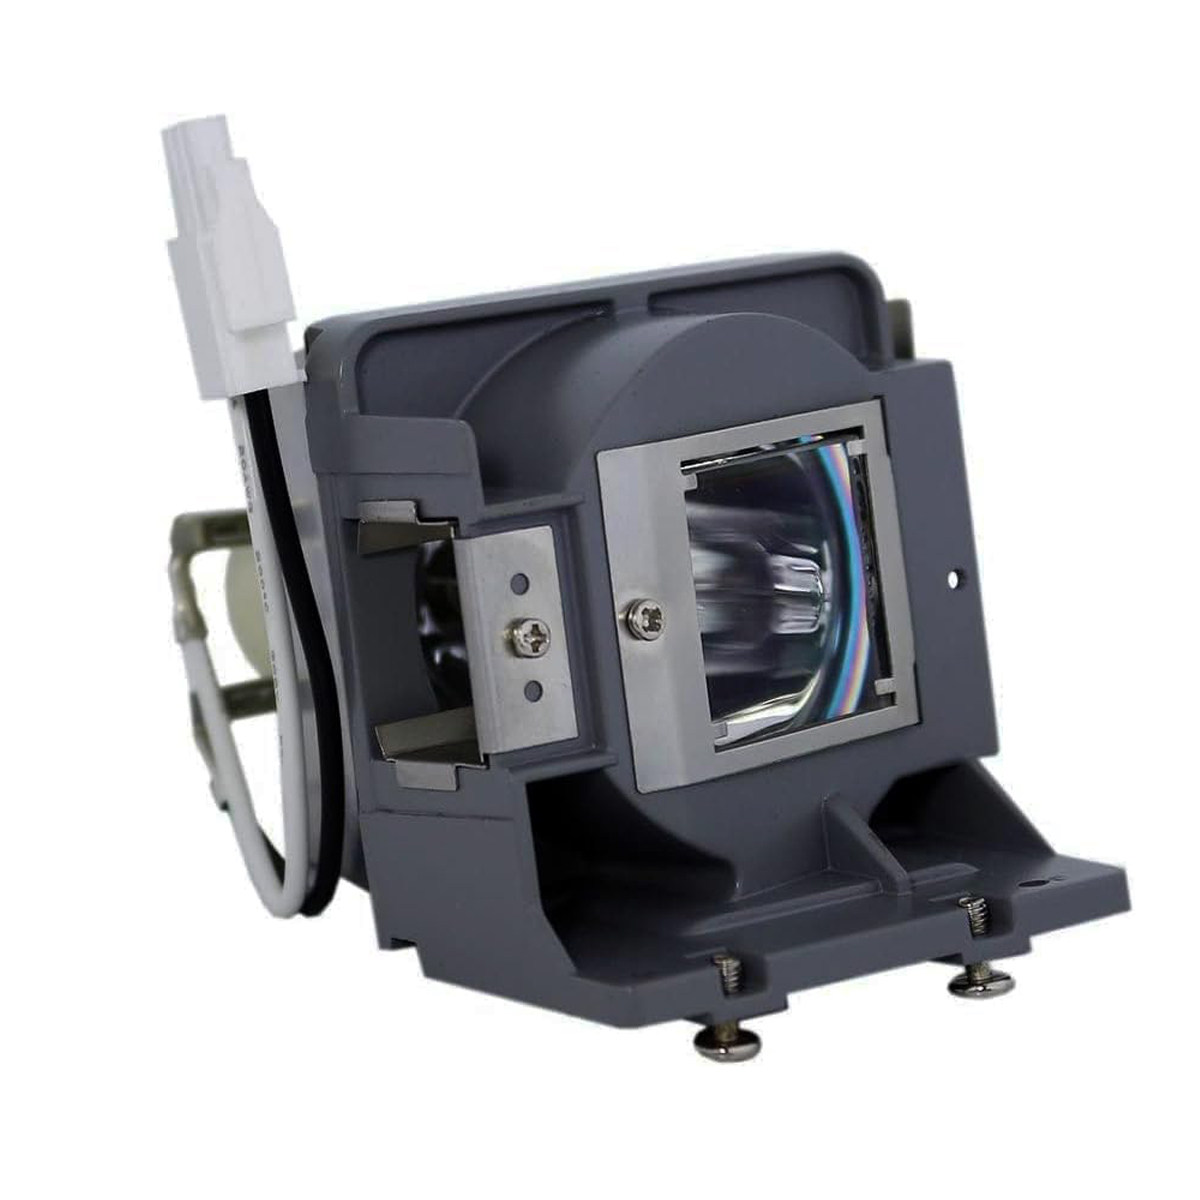 Replacement Projector lamp 5J.JA105.001 For BenQ MS521 MW523 MX522 TW523